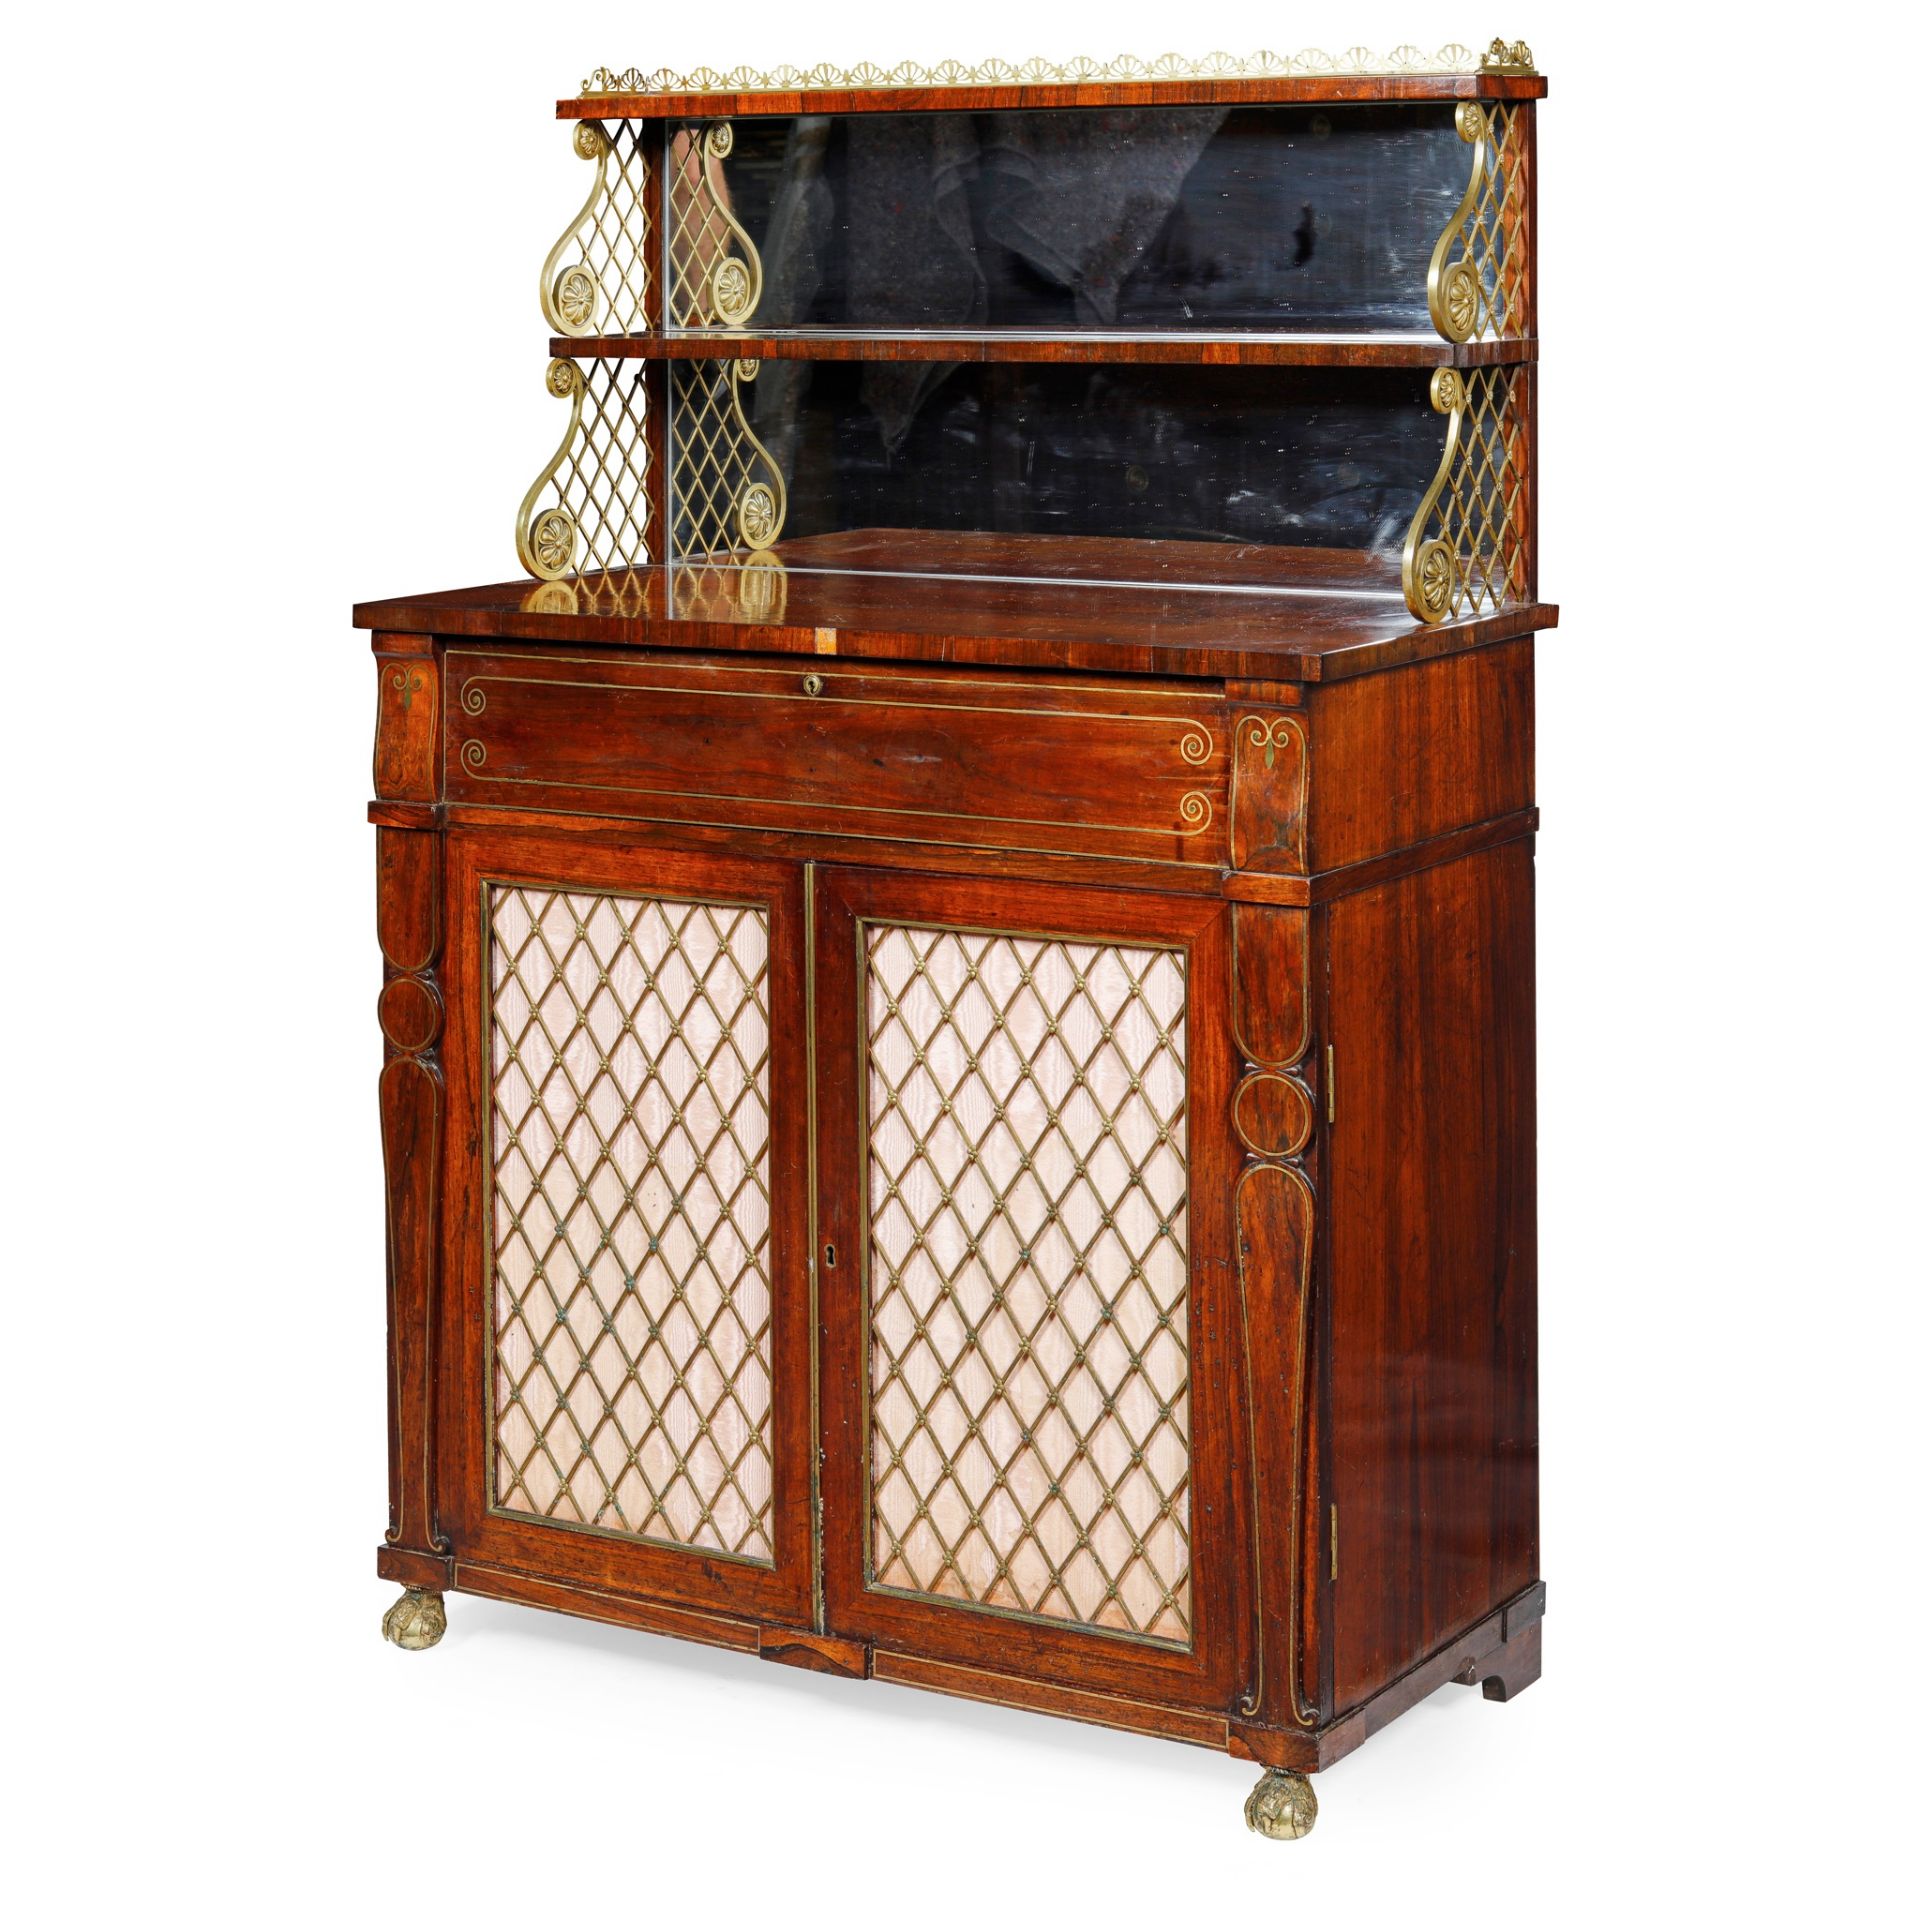 Y REGENCY ROSEWOOD AND BRASS MOUNTED SECRETAIRE CHIFFONIER EARLY 19TH CENTURY - Image 3 of 3